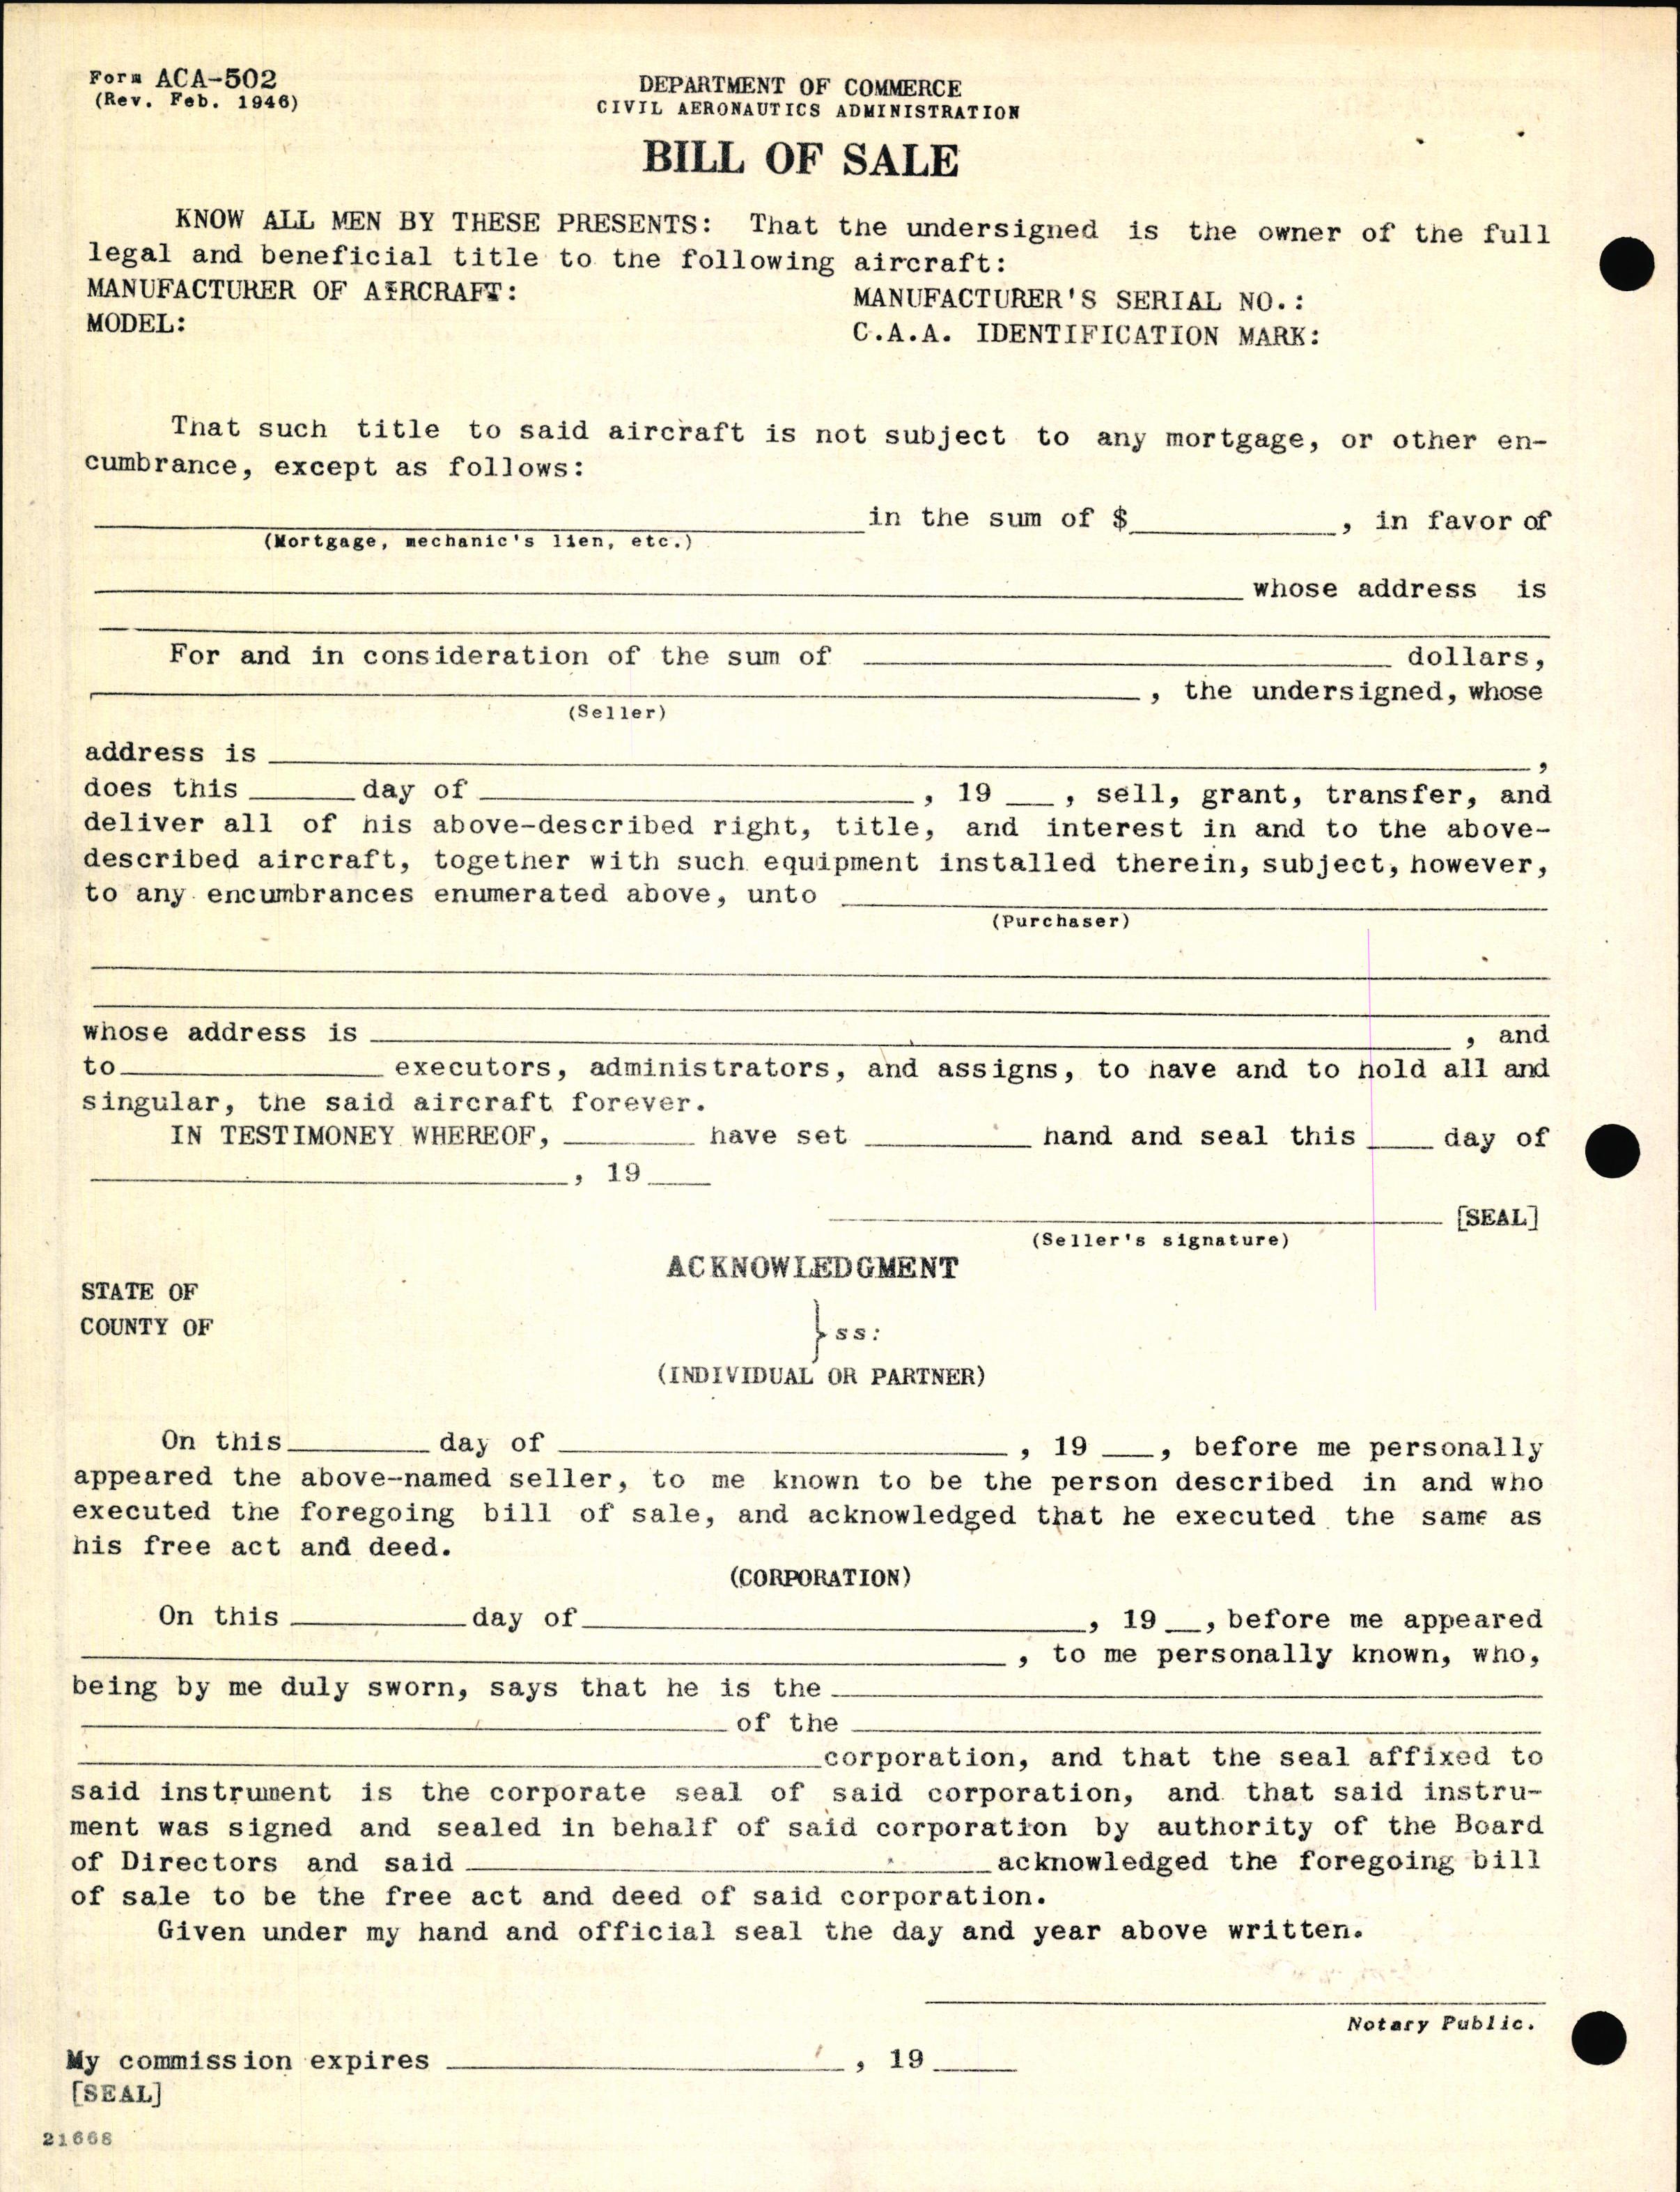 Sample page 4 from AirCorps Library document: Technical Information for Serial Number 2077